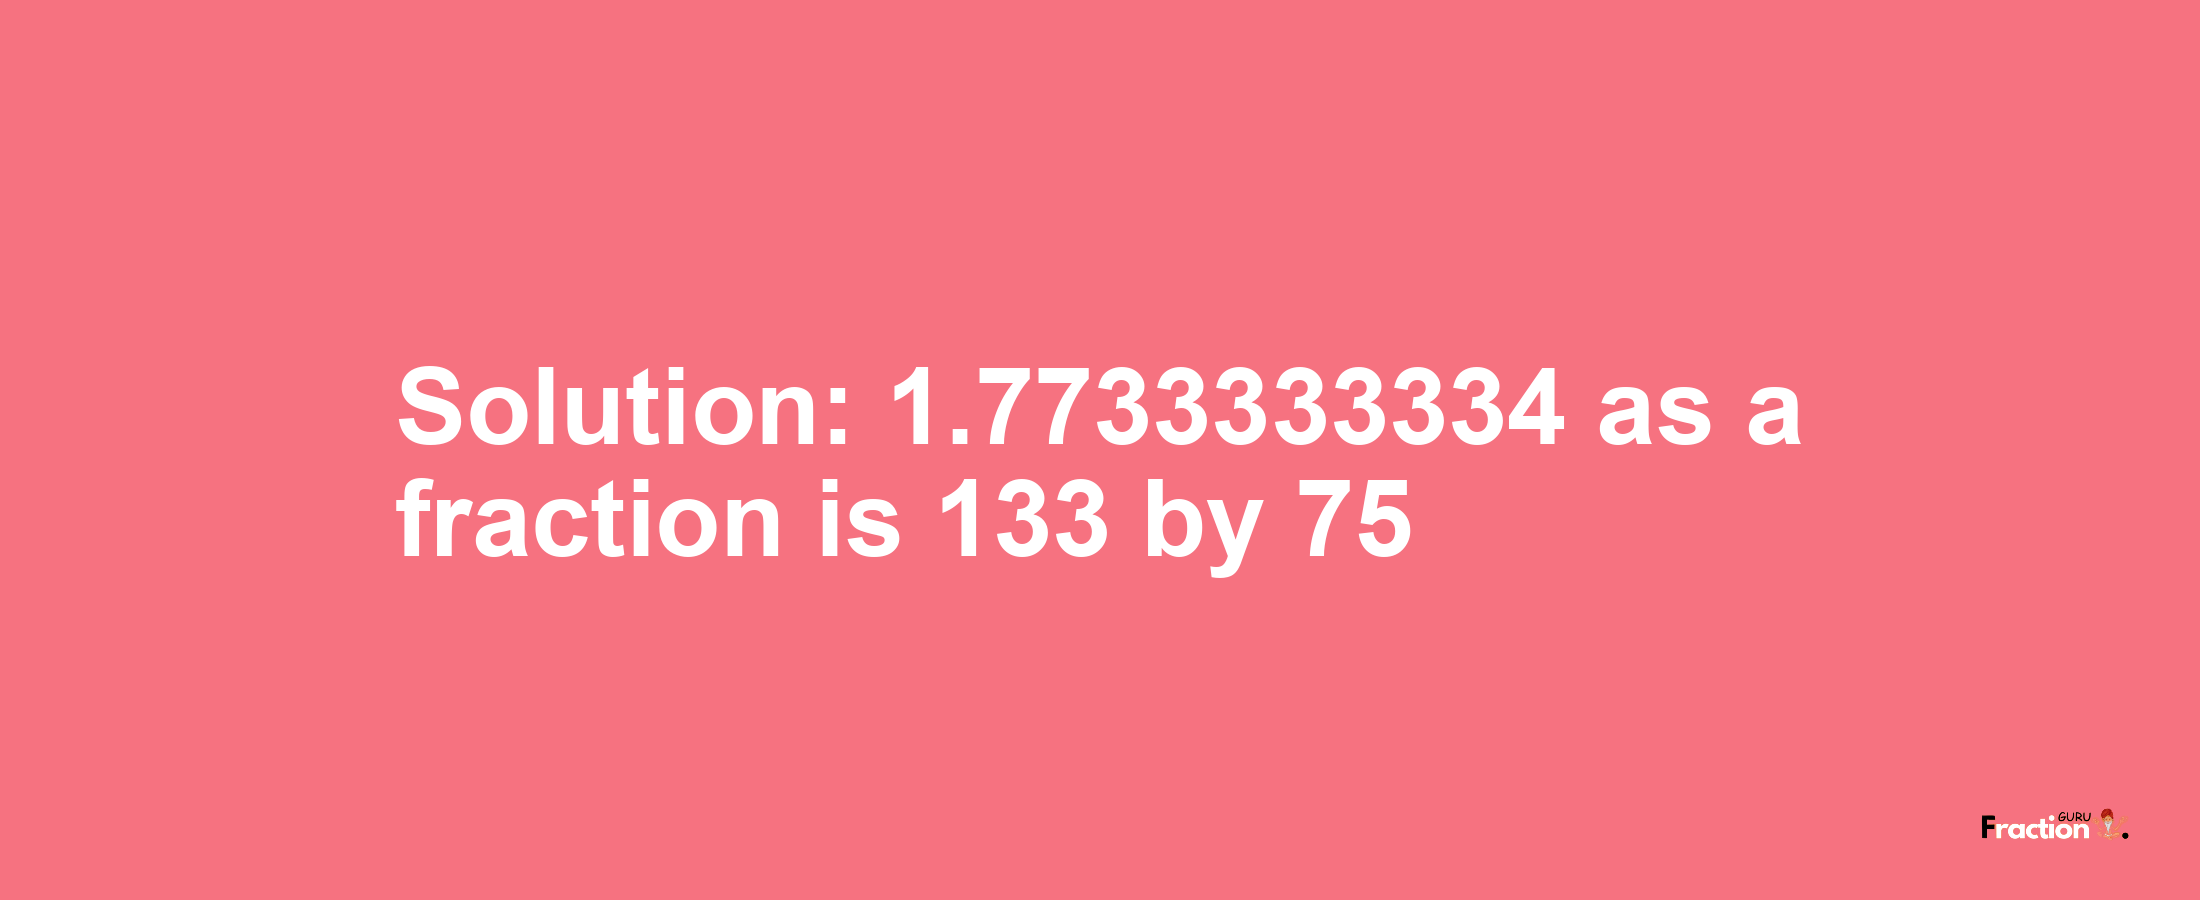 Solution:1.7733333334 as a fraction is 133/75